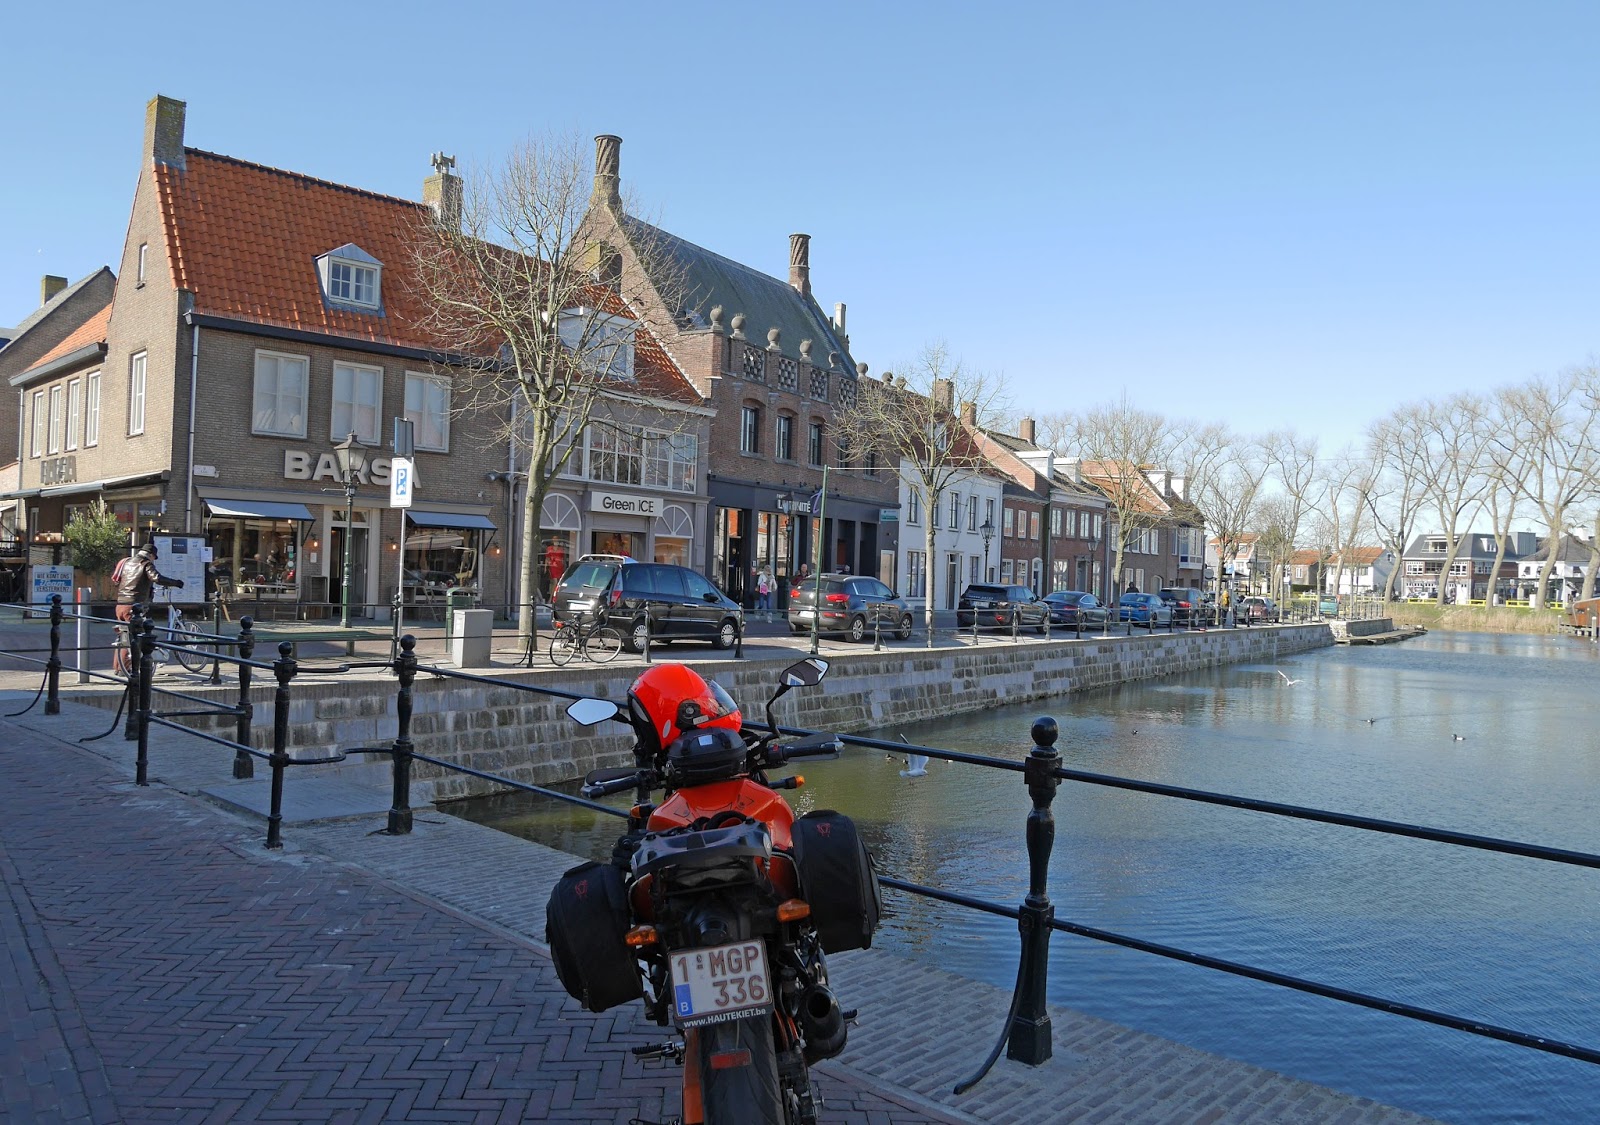 The canal in Sluis, The Netherlands